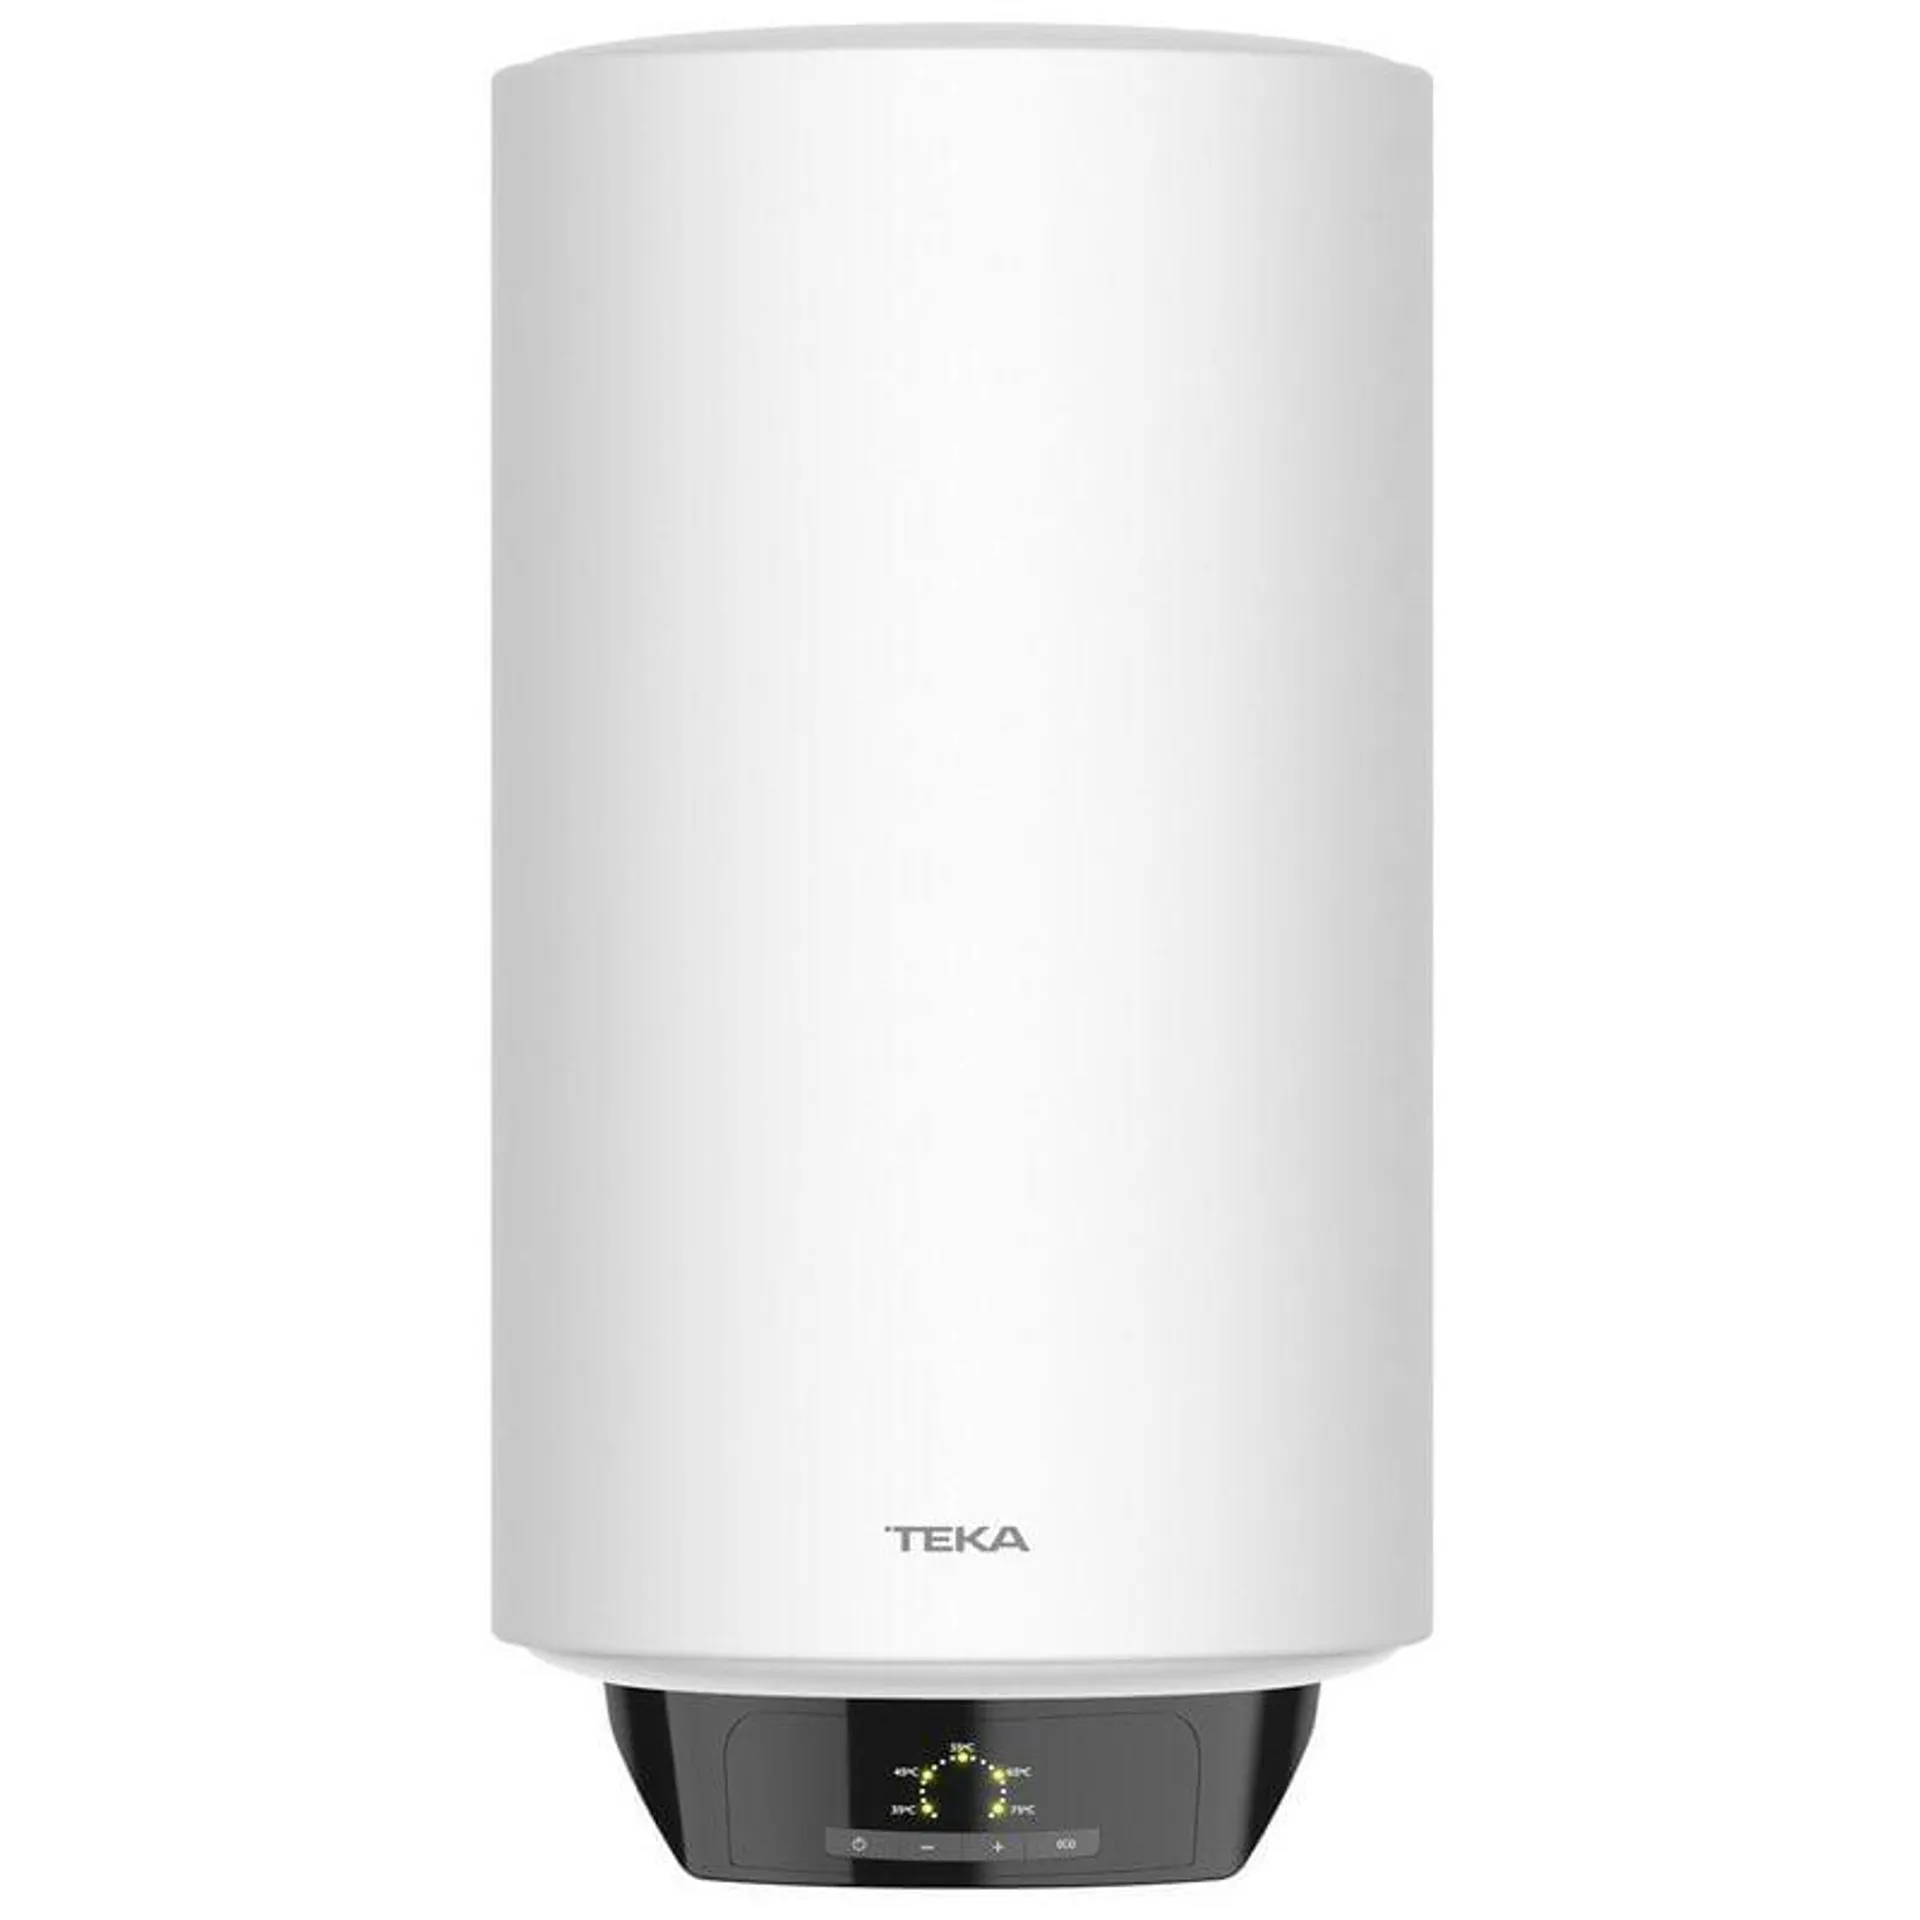 TEKA TERMO ELECTRICO SMART EWH30VED 30L (42080310)